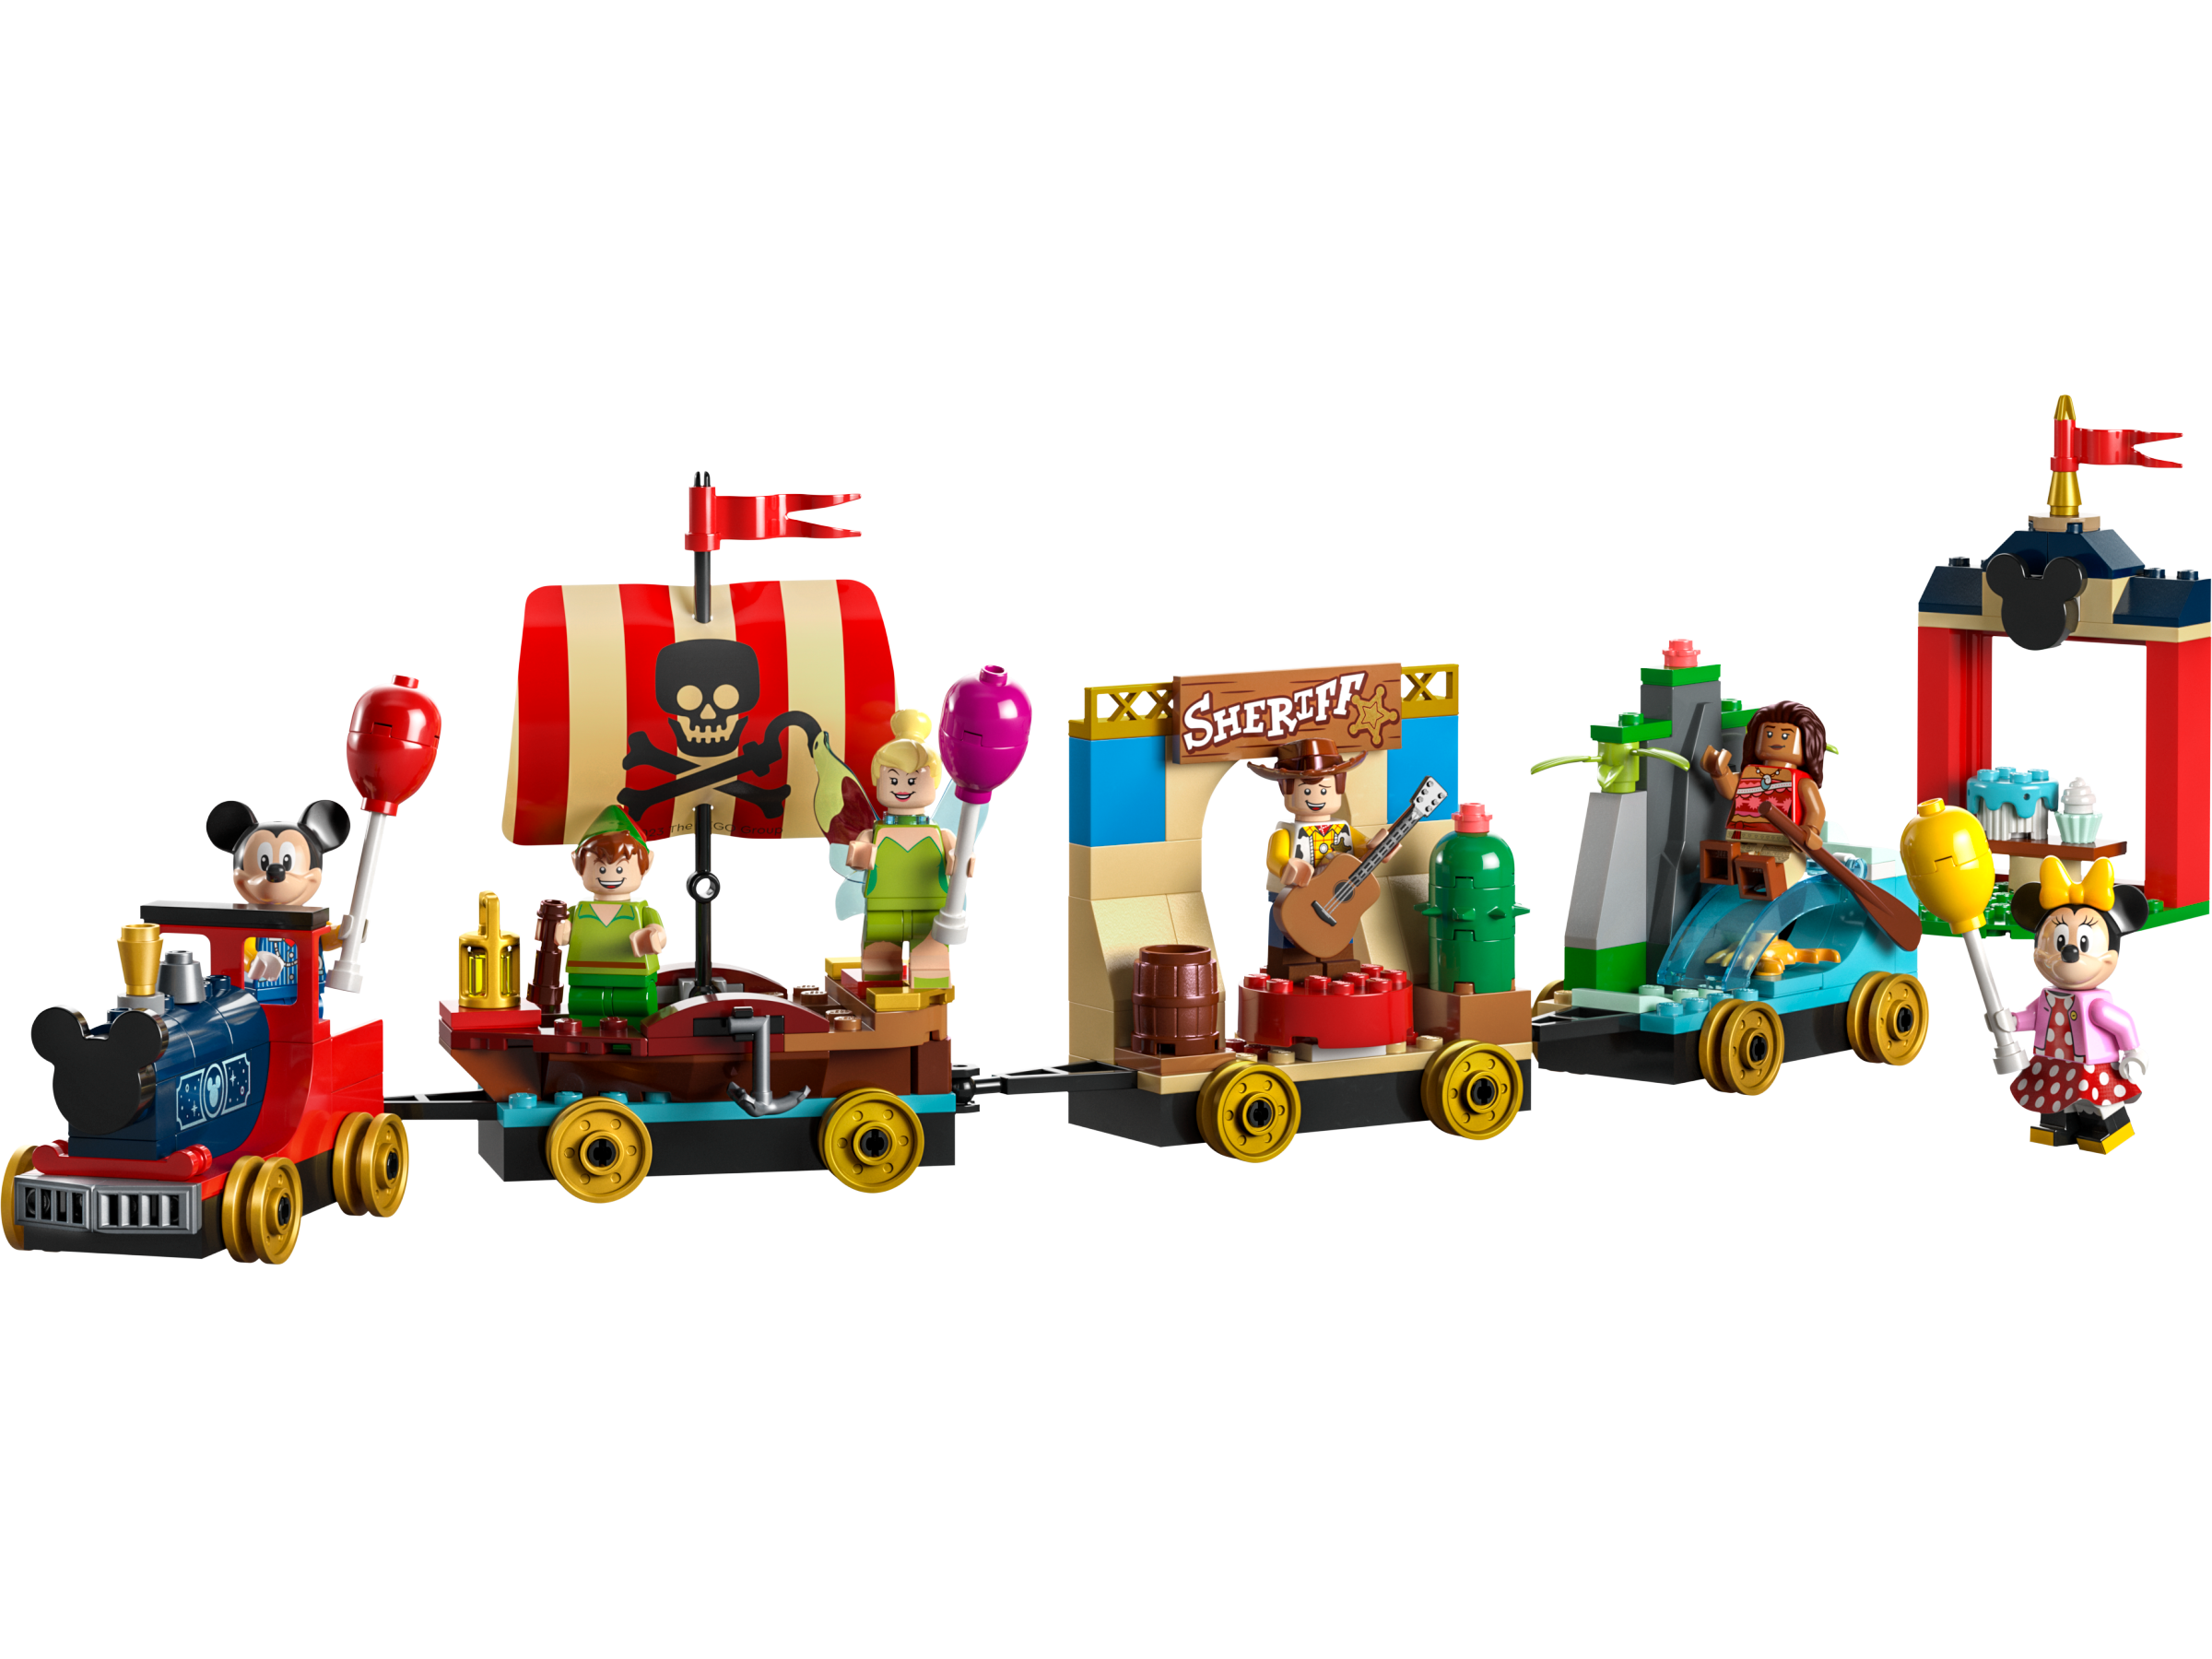 What's This? New Disney LEGO Set Is on the Way!